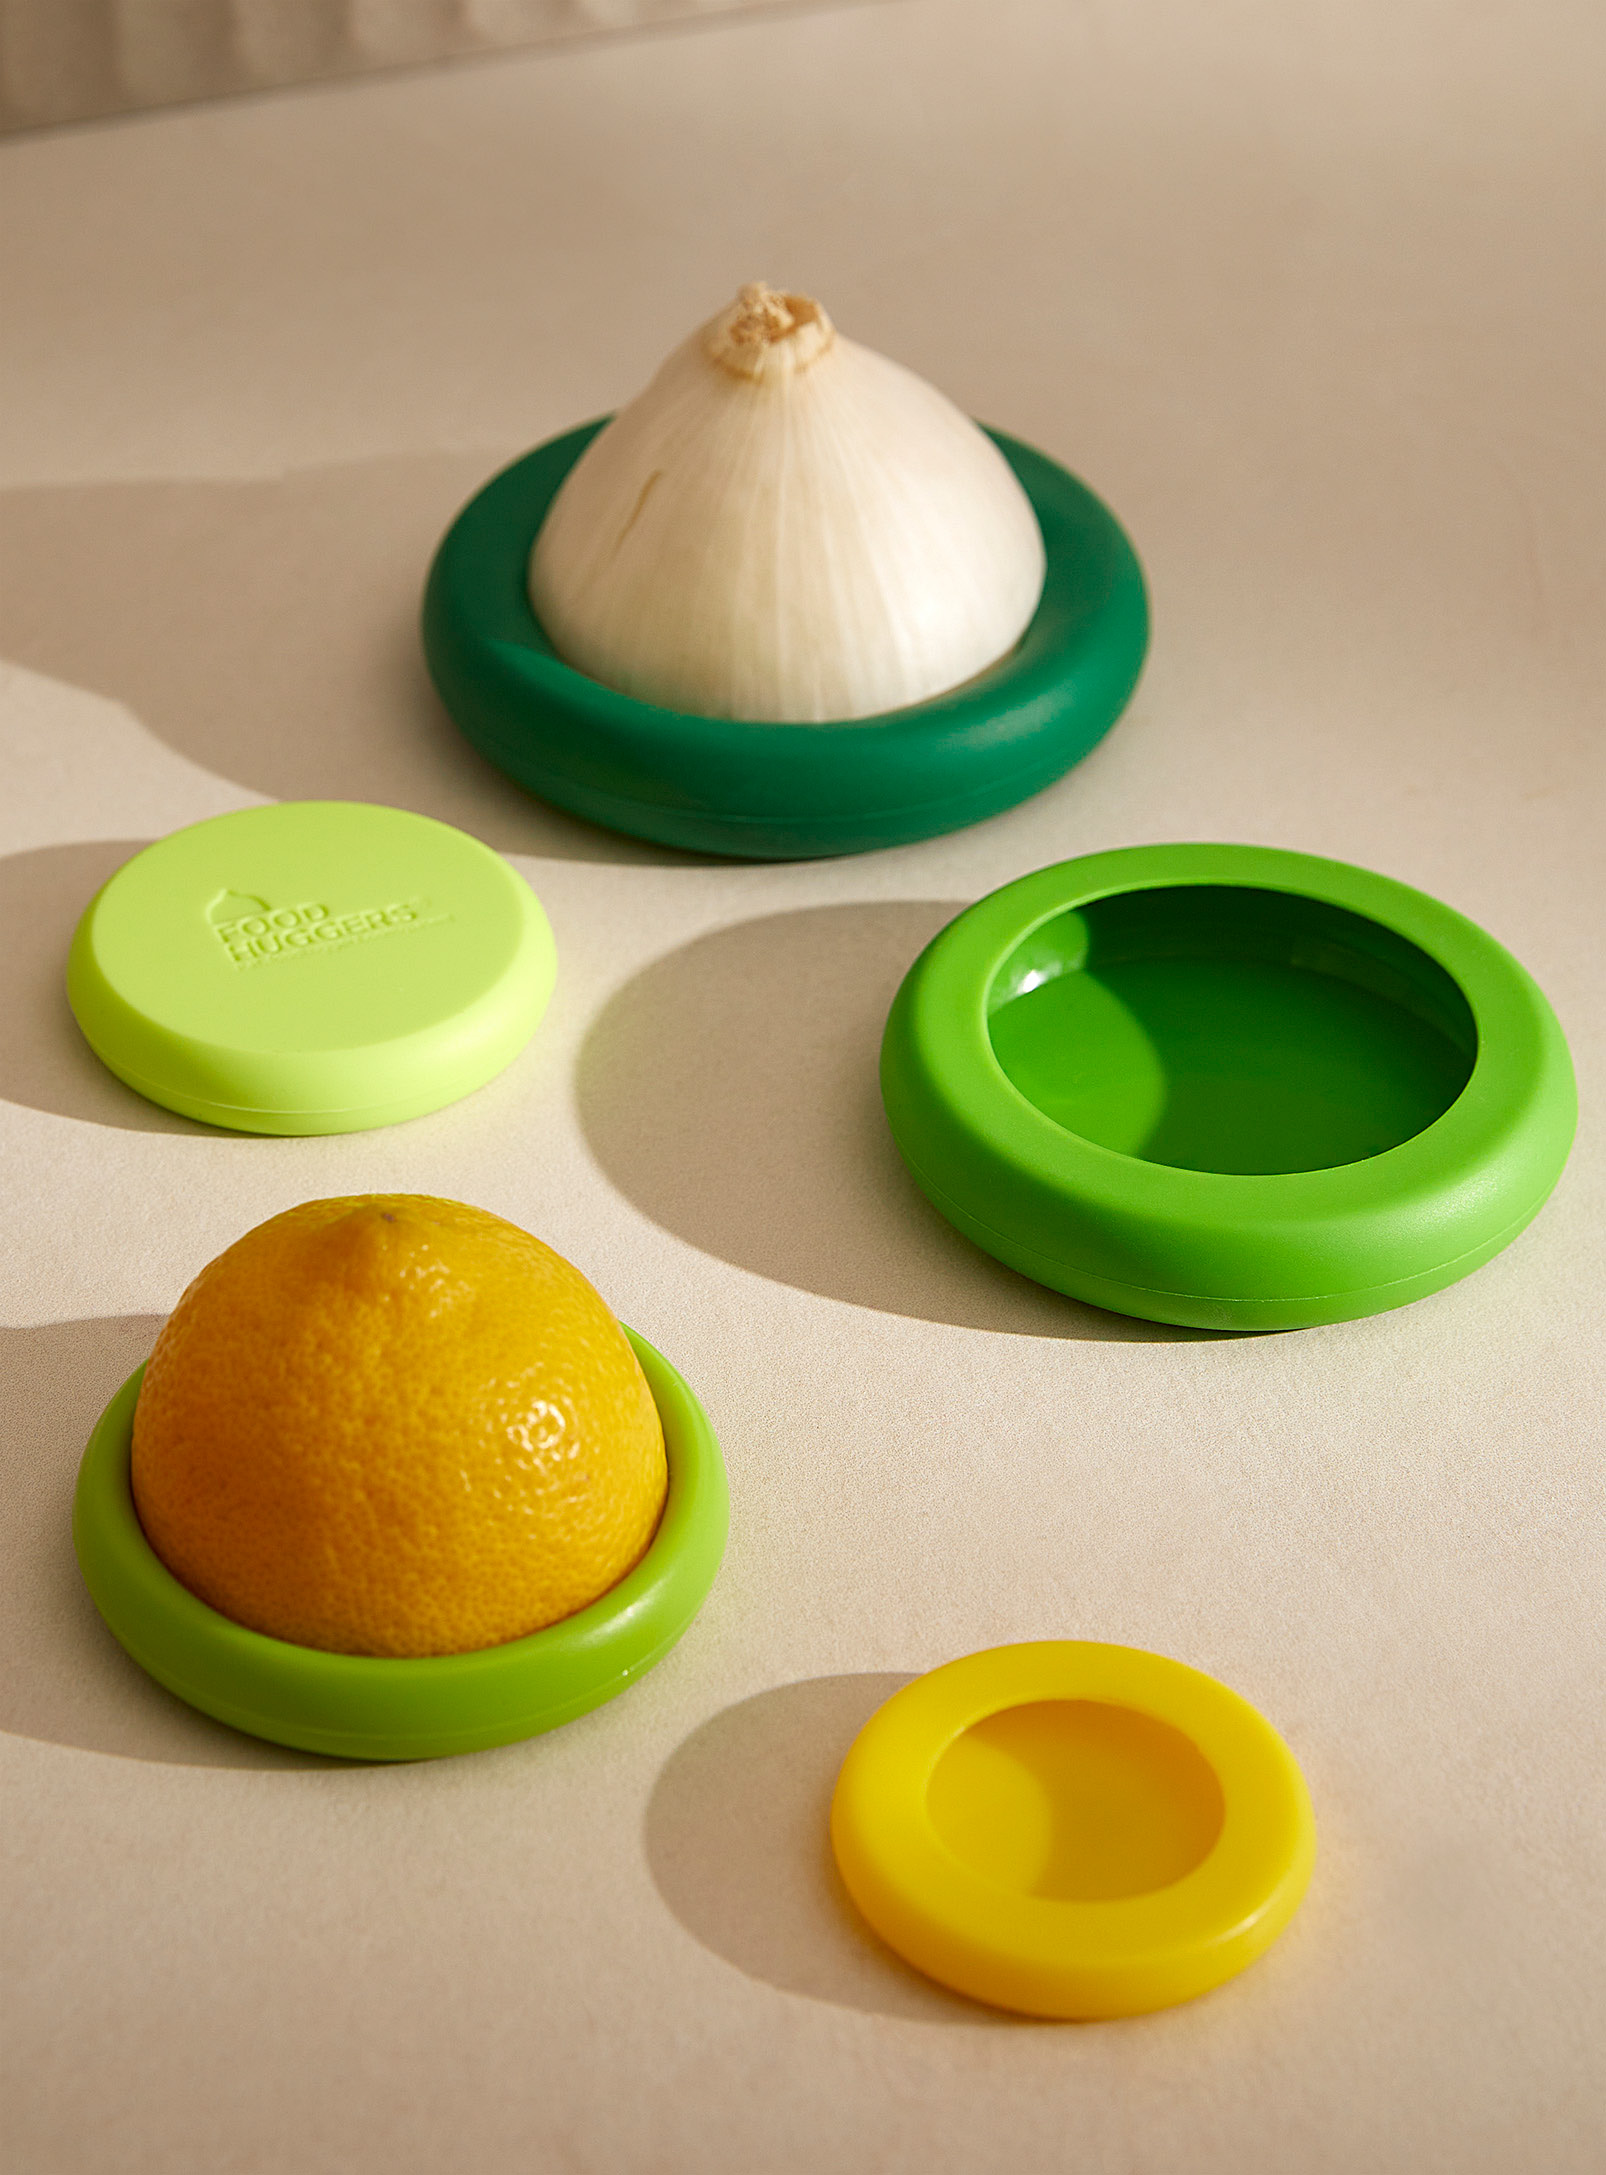 Simons Maison - Fruit and vegetable silicone lids Set of 5